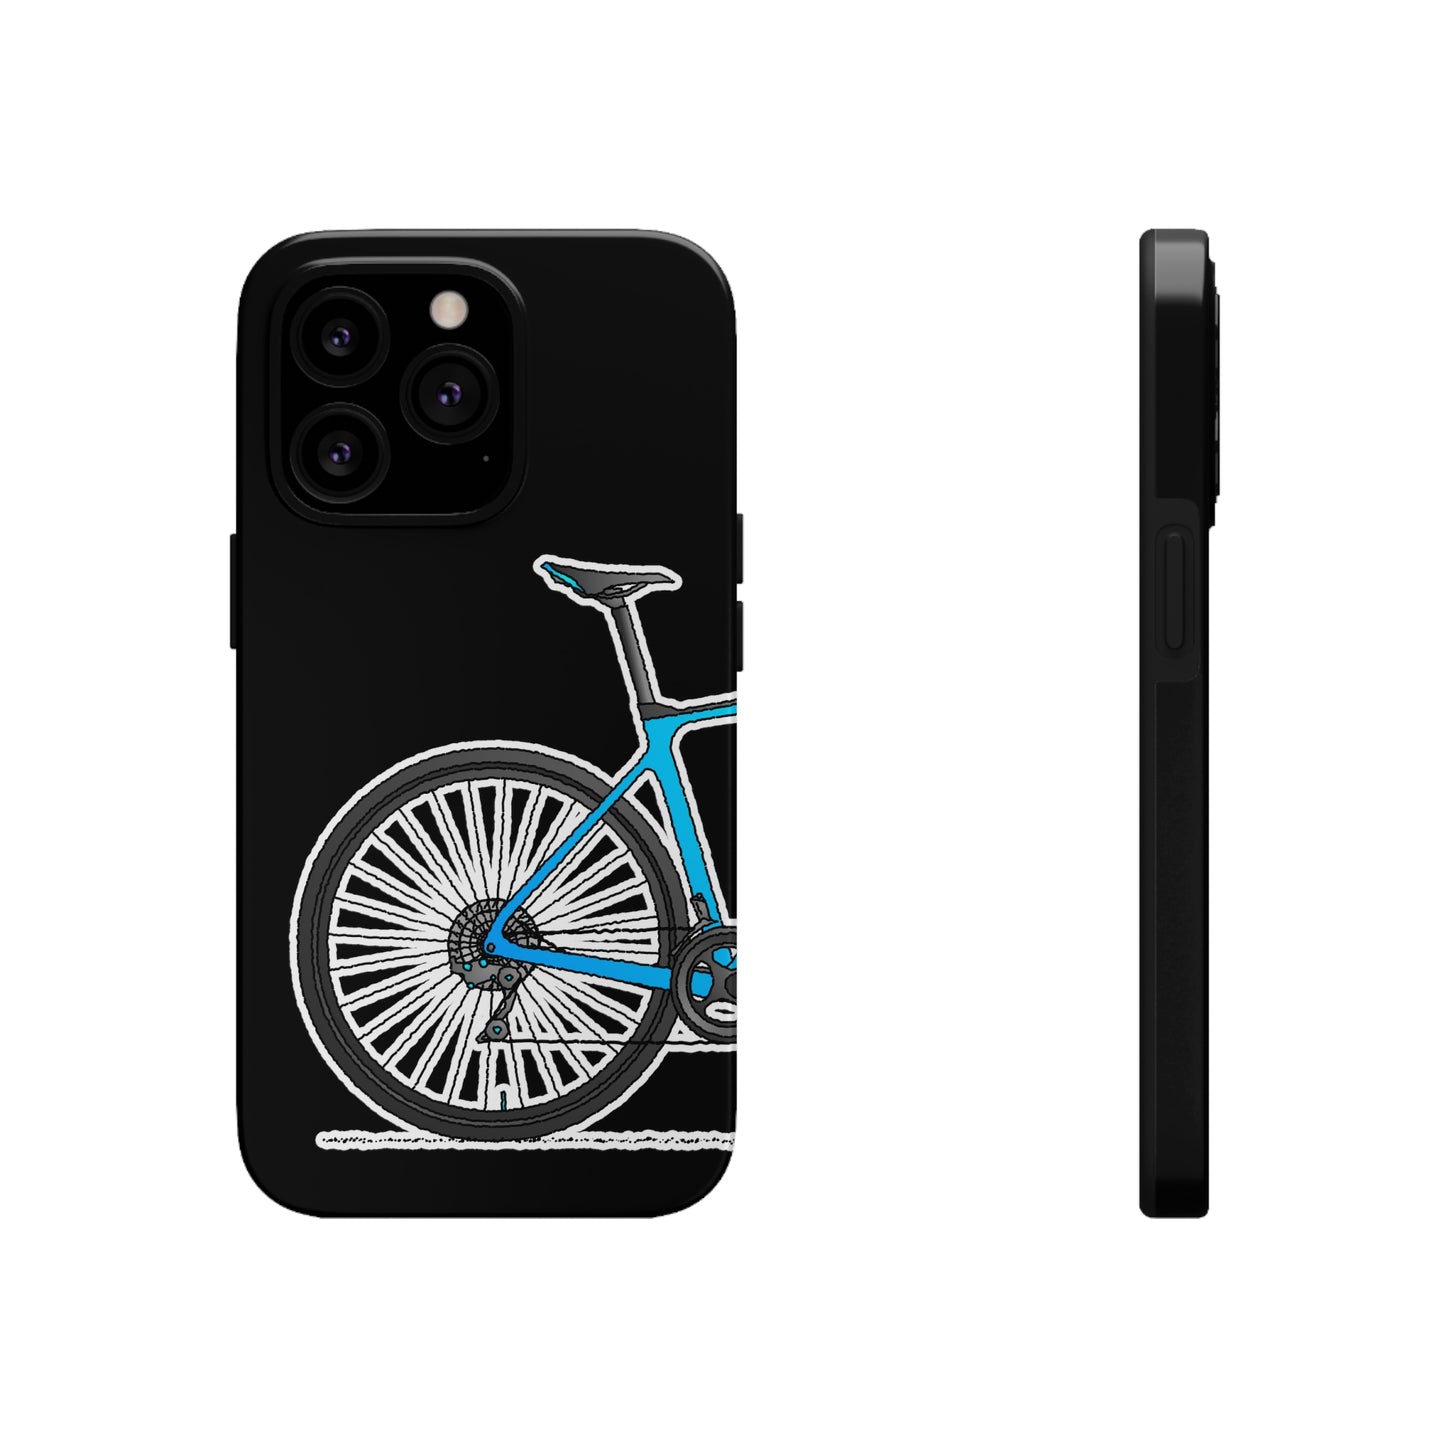 Blue Bicycle Tough iPhone Case. Road Gravel. 7,8,X,11,12,13,14. i001